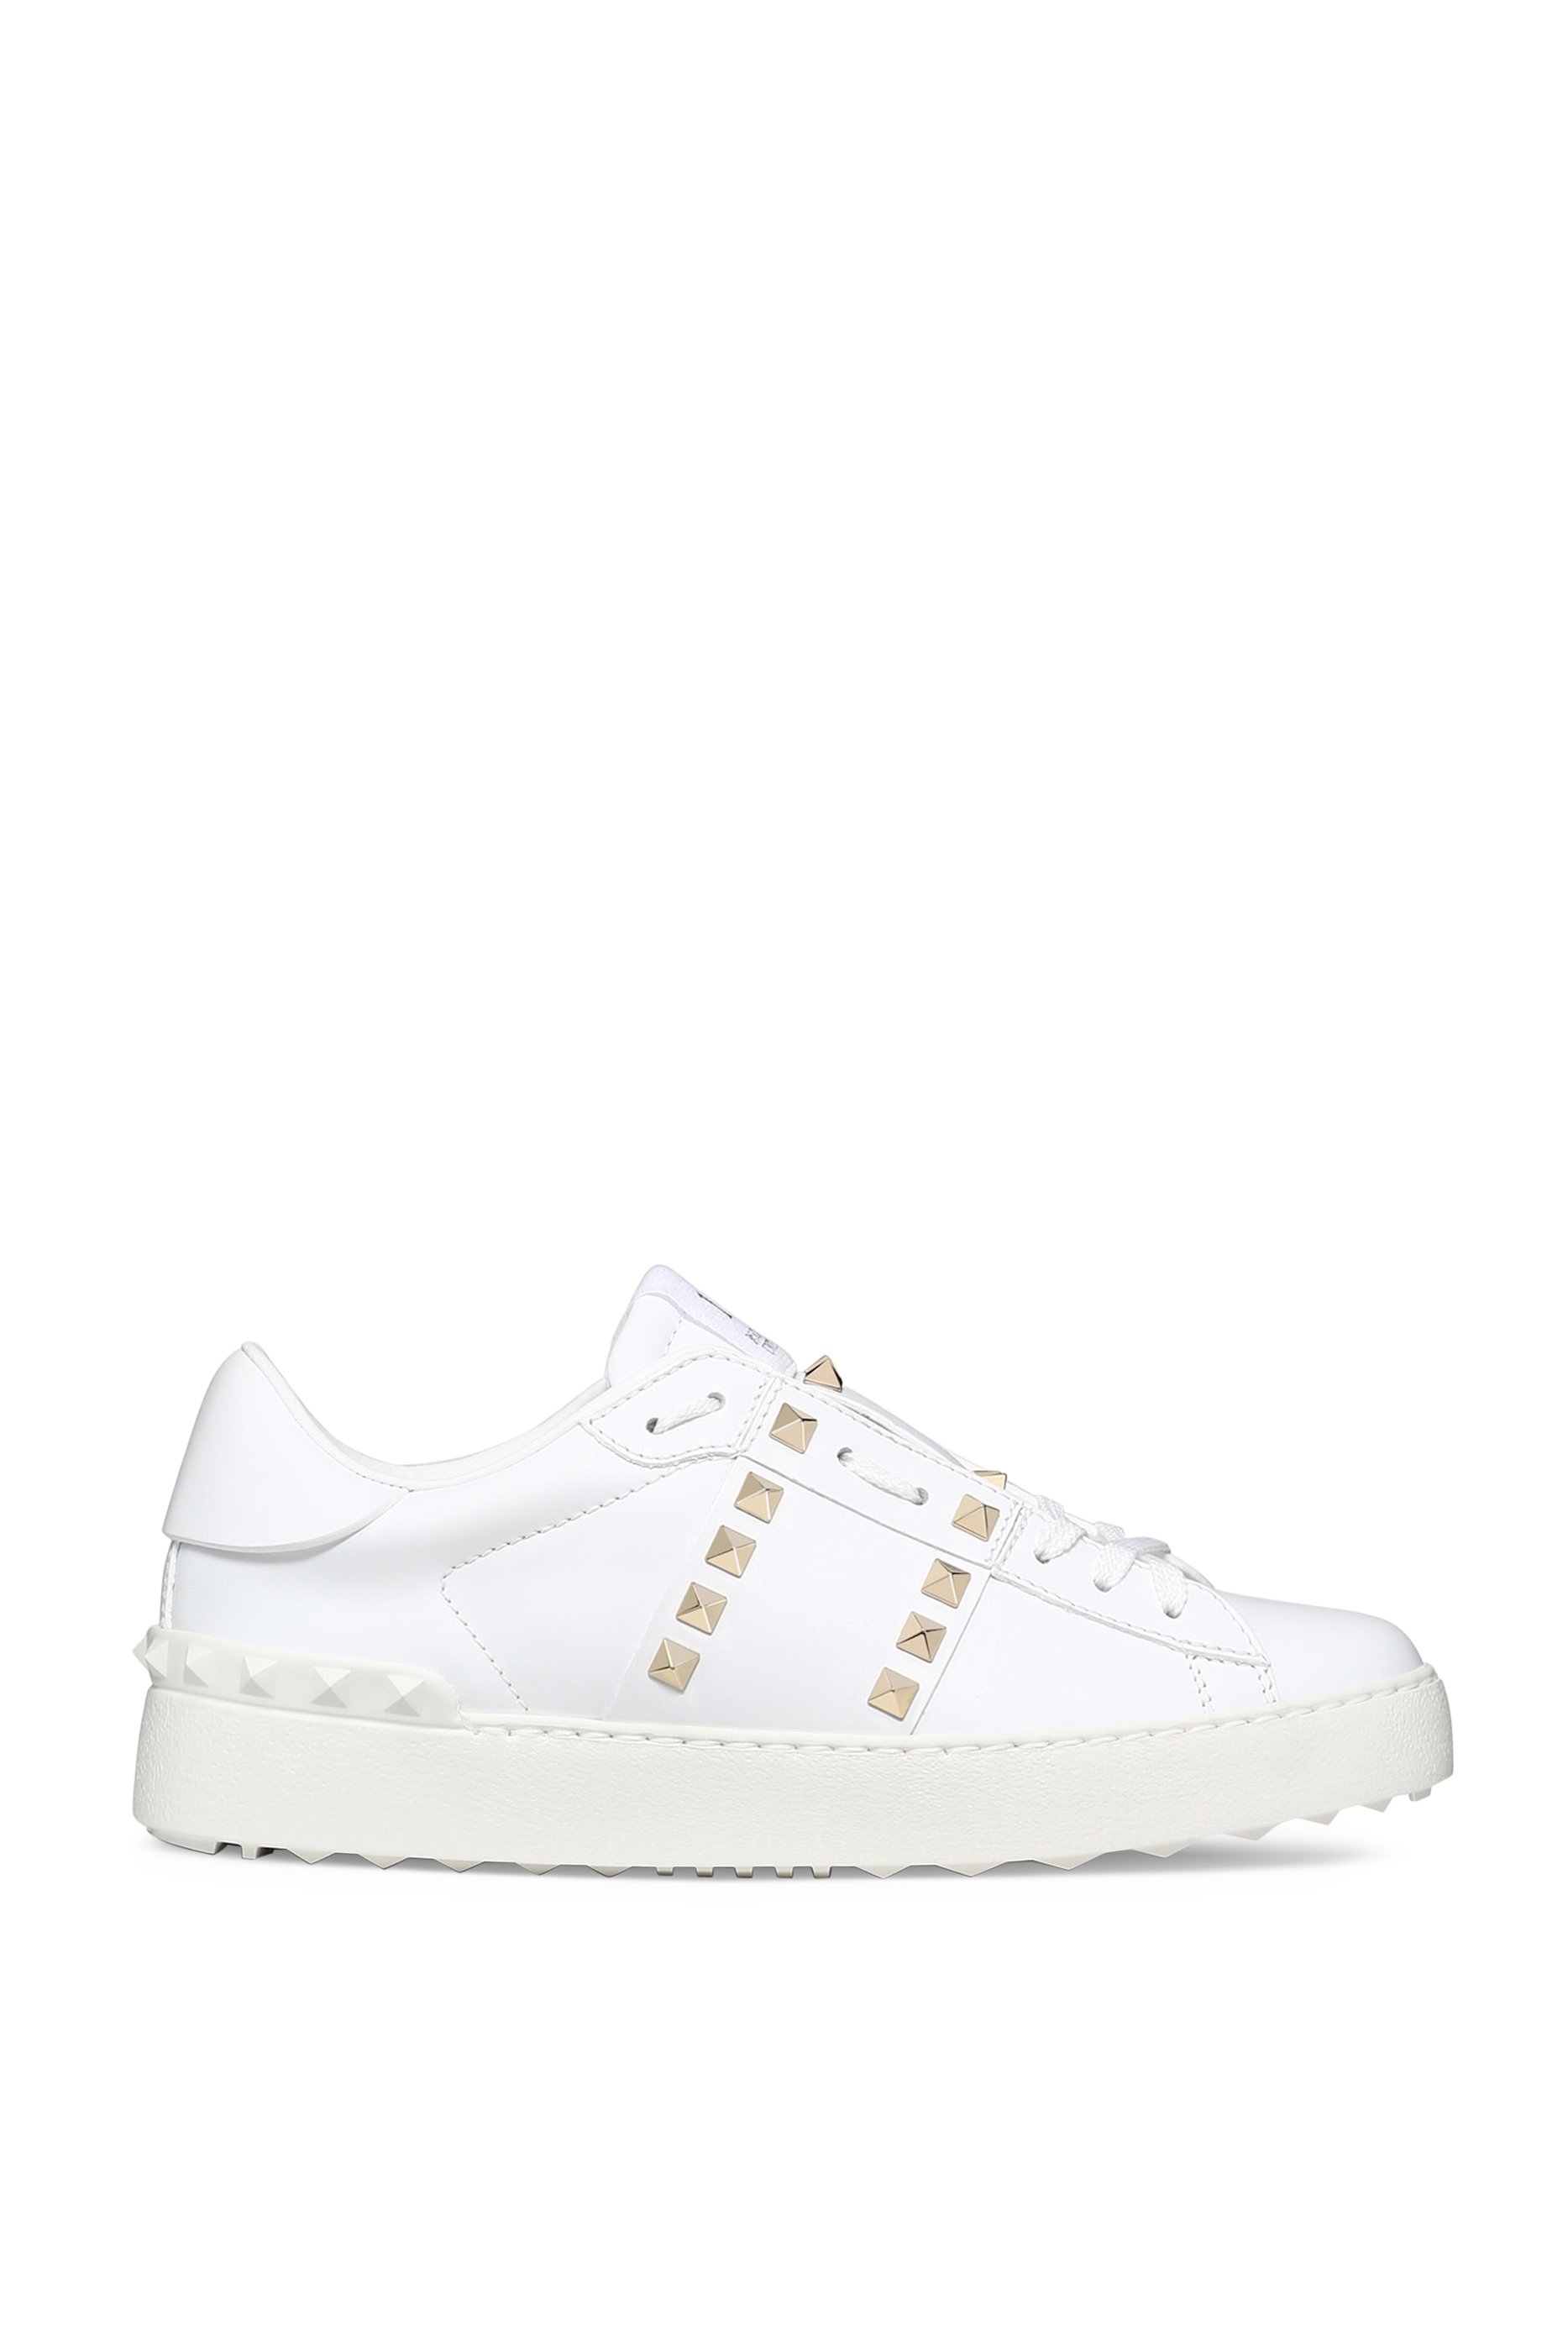 Buy Valentino Open Rockstud Leather Sneakers - Womens for AED 2800.00 ...